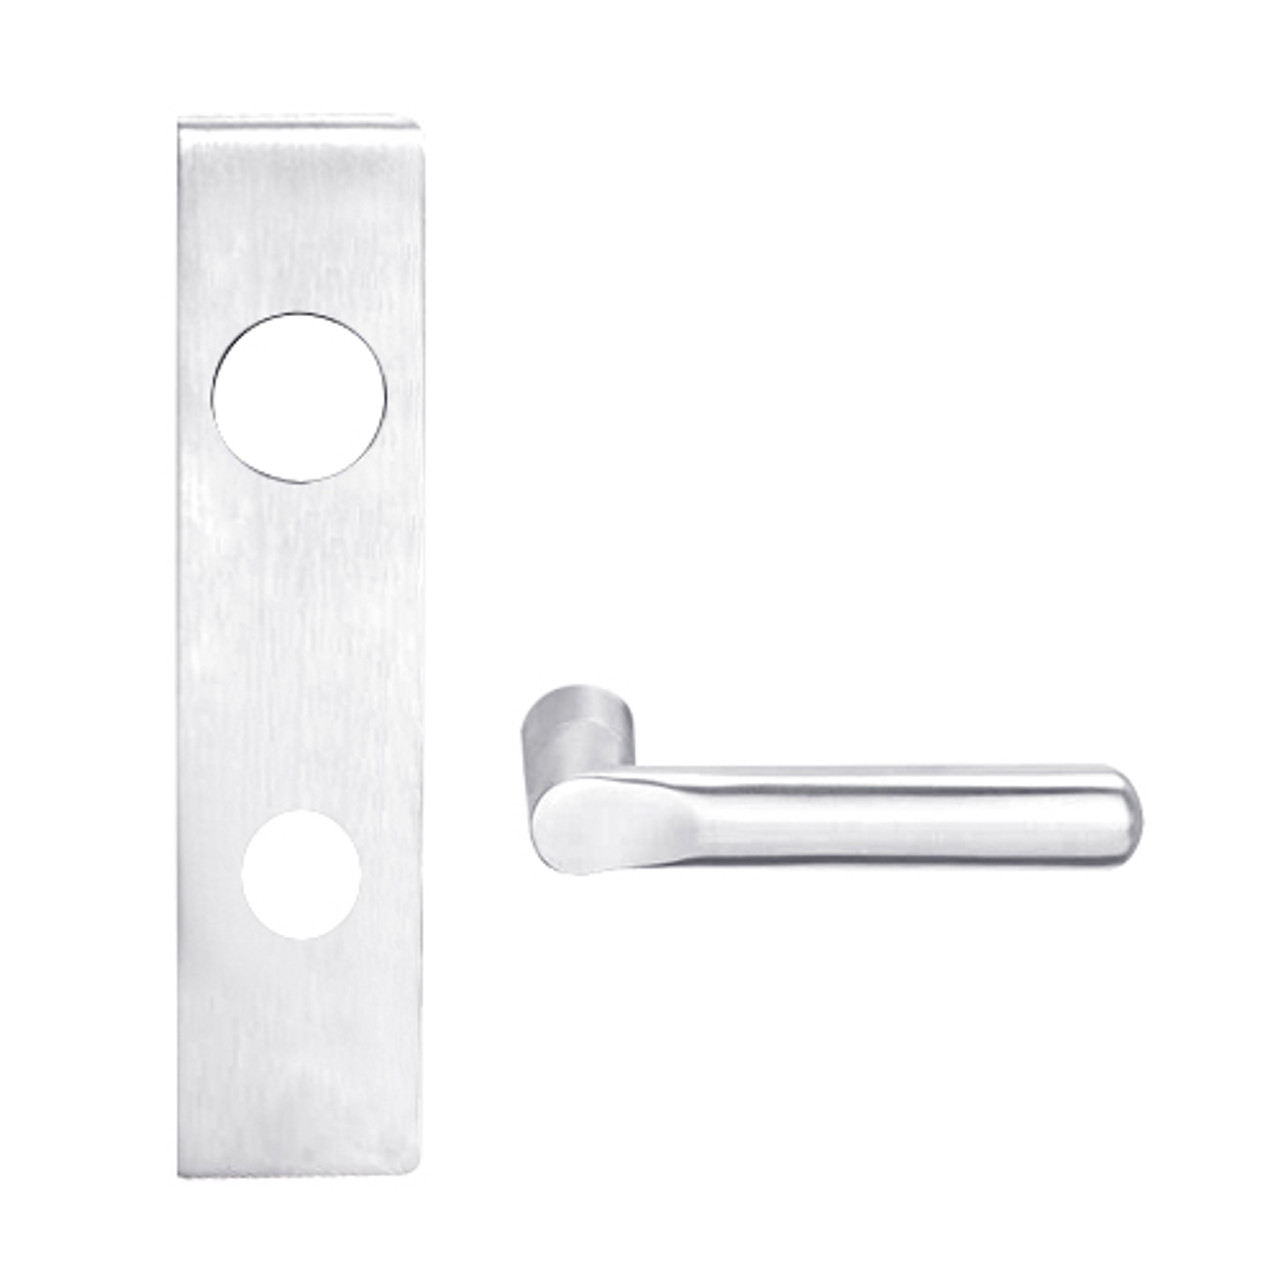 L9050J-18L-625 Schlage L Series Entrance Commercial Mortise Lock with 18 Cast Lever Design Prepped for FSIC in Bright Chrome